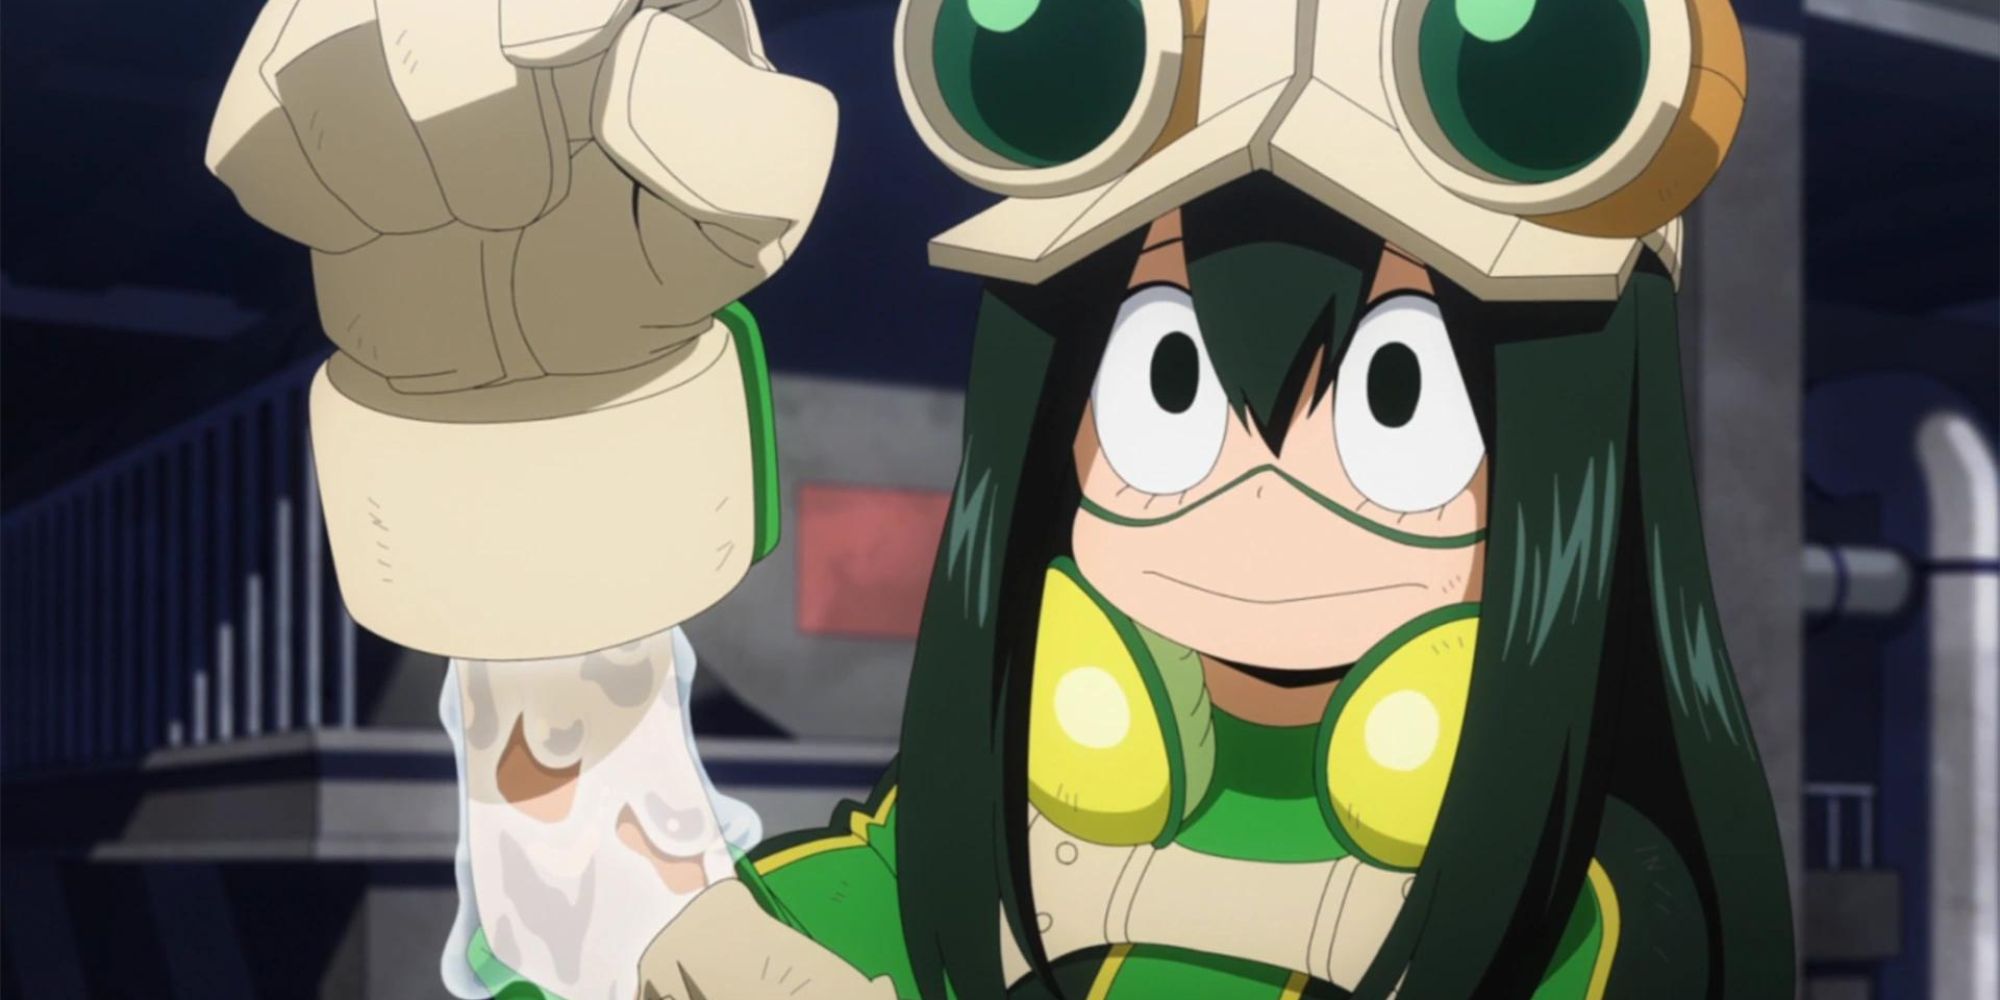 Tsuyu Asui uses her quirk to secrete a liquid from her body in My Hero Academia